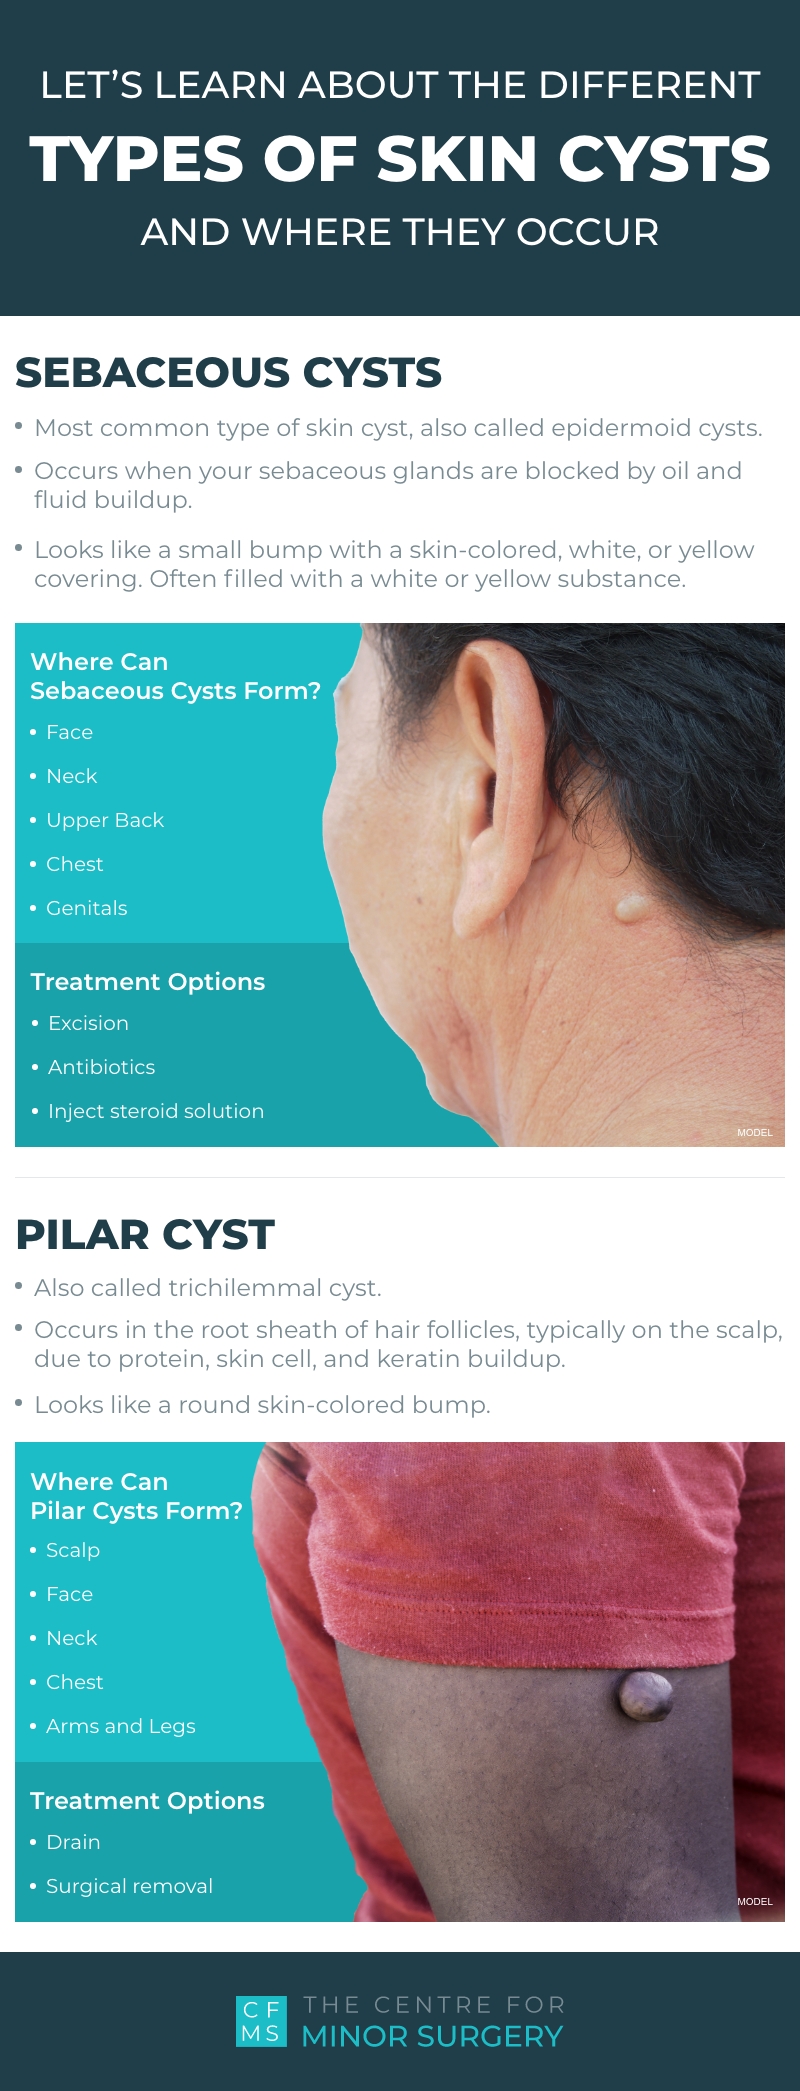 Types of cysts infographic